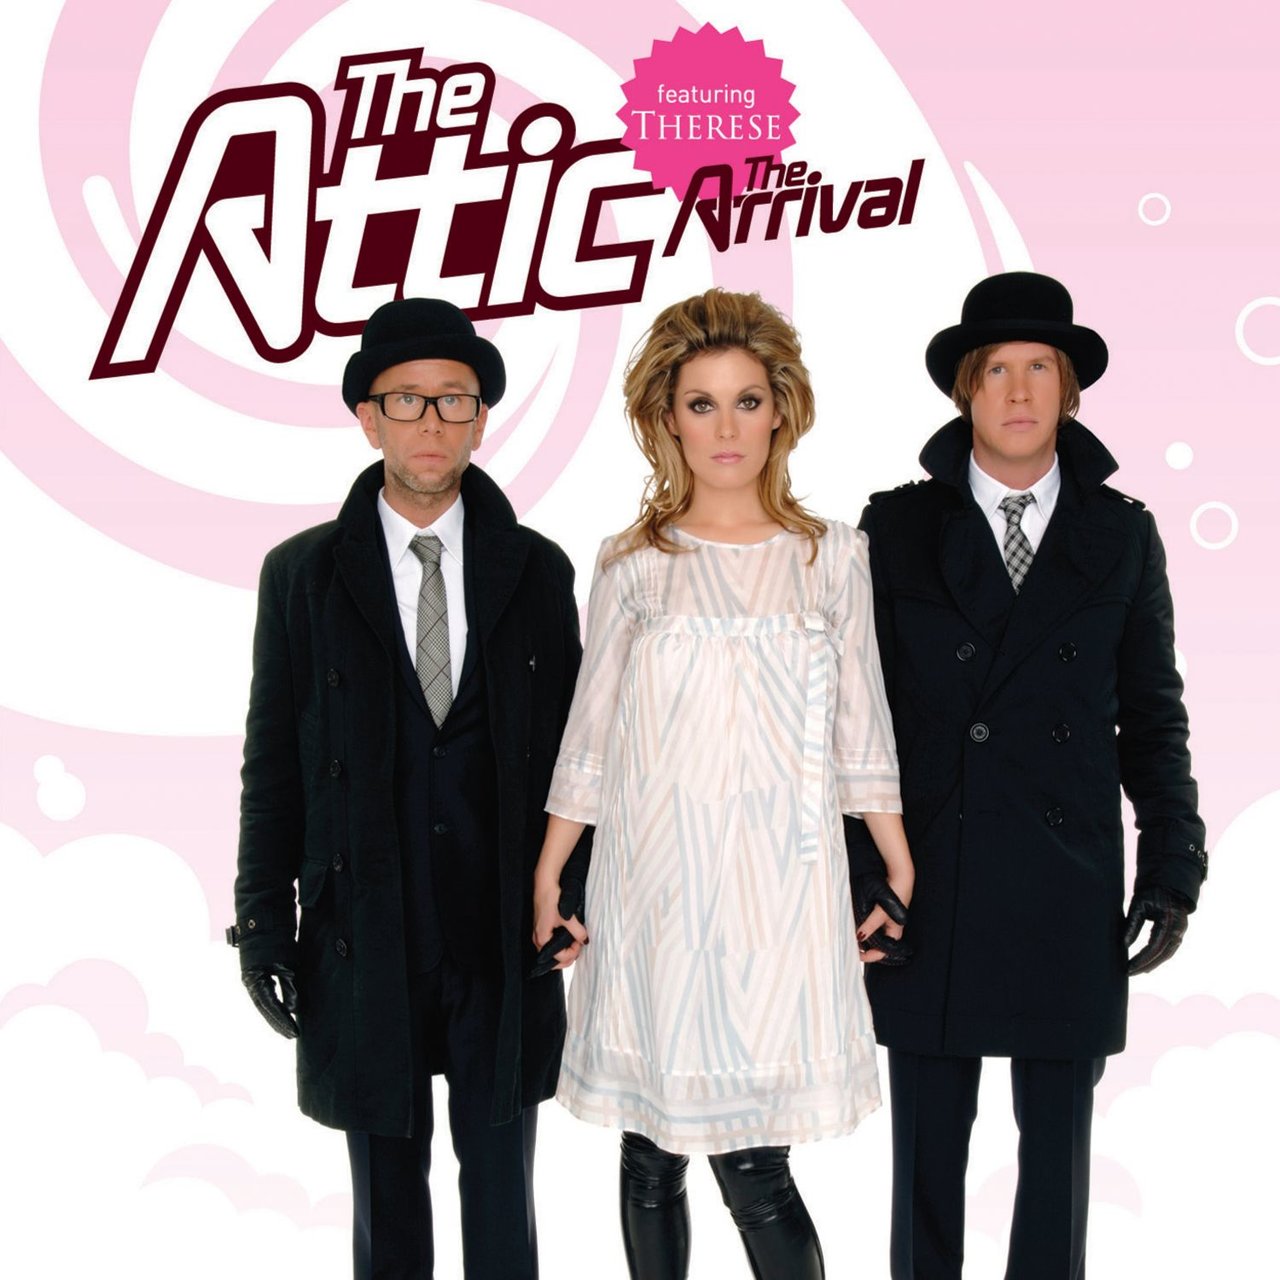 The Attic featuring Therese — The Arrival cover artwork